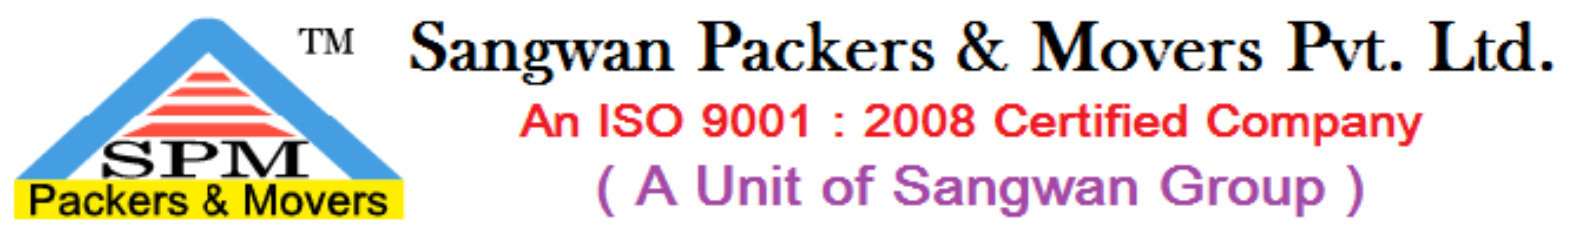 Sangwan packers and movers bangalore